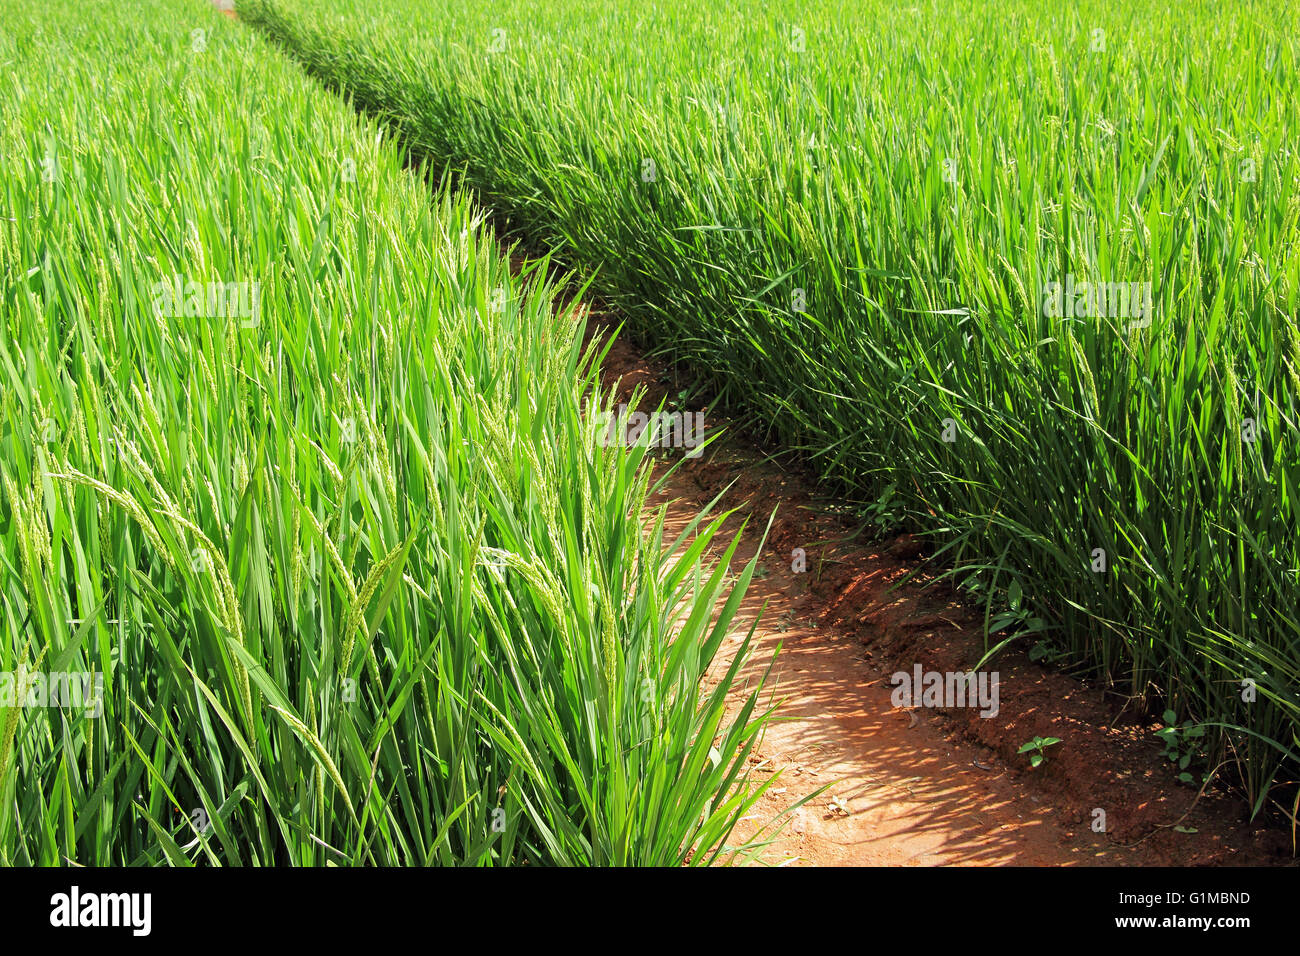 Ripening rice paddy plants in the tropical region of India. Stock Photo